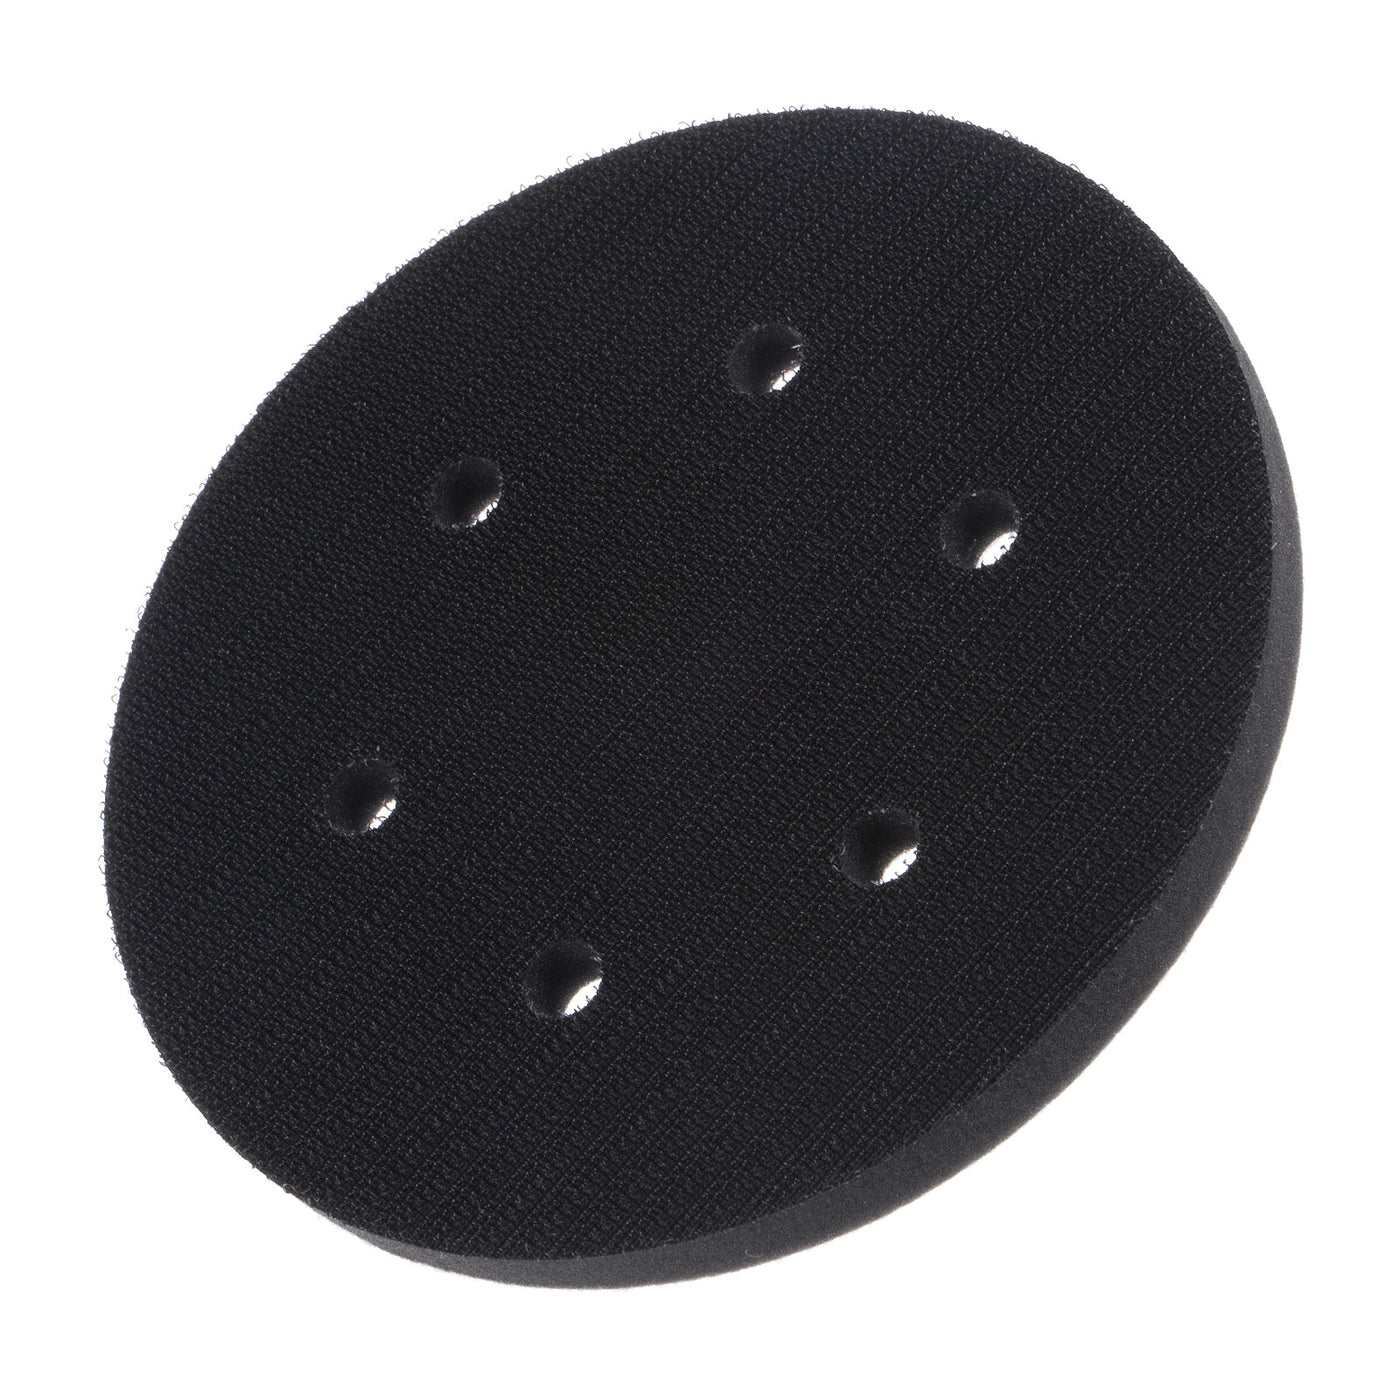 uxcell Uxcell 6 Inch 6 Holes Sponge Interface Pad Soft Density Hook and Loop Cushion Buffer Backing Pad for Electric Sander